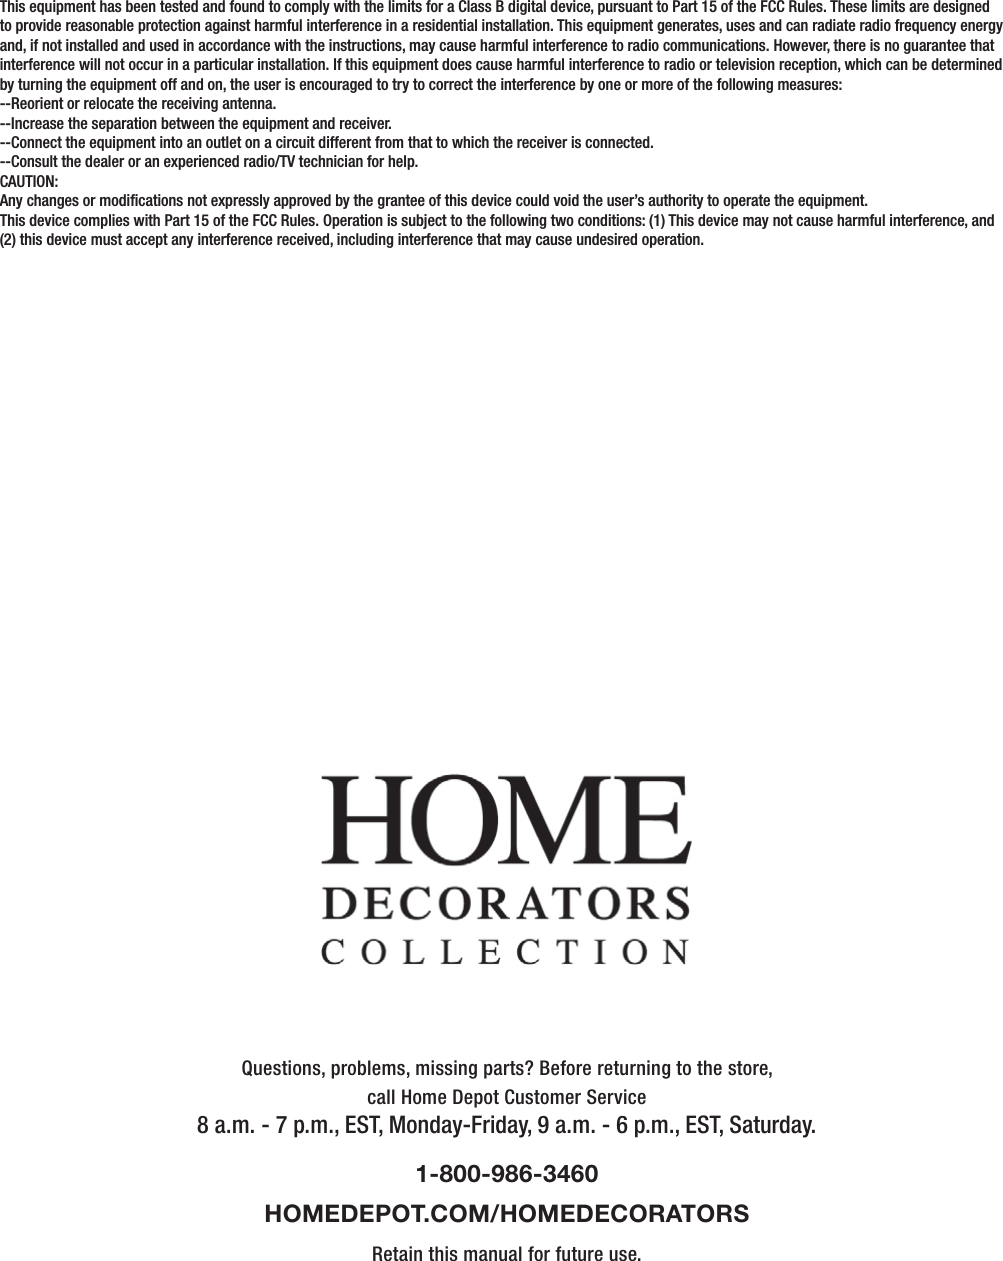 Questions, problems, missing parts? Before returning to the store,call Home Depot Customer Service8 a.m. - 7 p.m., EST, Monday-Friday, 9 a.m. - 6 p.m., EST, Saturday.1-800-986-3460HOMEDEPOT.COM/HOMEDECORATORSRetain this manual for future use.This equipment has been tested and found to comply with the limits for a Class B digital device, pursuant to Part 15 of the FCC Rules. These limits are designed to provide reasonable protection against harmful interference in a residential installation. This equipment generates, uses and can radiate radio frequency energy and, if not installed and used in accordance with the instructions, may cause harmful interference to radio communications. However, there is no guarantee that interference will not occur in a particular installation. If this equipment does cause harmful interference to radio or television reception, which can be determined by turning the equipment off and on, the user is encouraged to try to correct the interference by one or more of the following measures:--Reorient or relocate the receiving antenna.--Increase the separation between the equipment and receiver.--Connect the equipment into an outlet on a circuit different from that to which the receiver is connected.--Consult the dealer or an experienced radio/TV technician for help.CAUTION:Any changes or modications not expressly approved by the grantee of this device could void the user’s authority to operate the equipment.This device complies with Part 15 of the FCC Rules. Operation is subject to the following two conditions: (1) This device may not cause harmful interference, and (2) this device must accept any interference received, including interference that may cause undesired operation.      